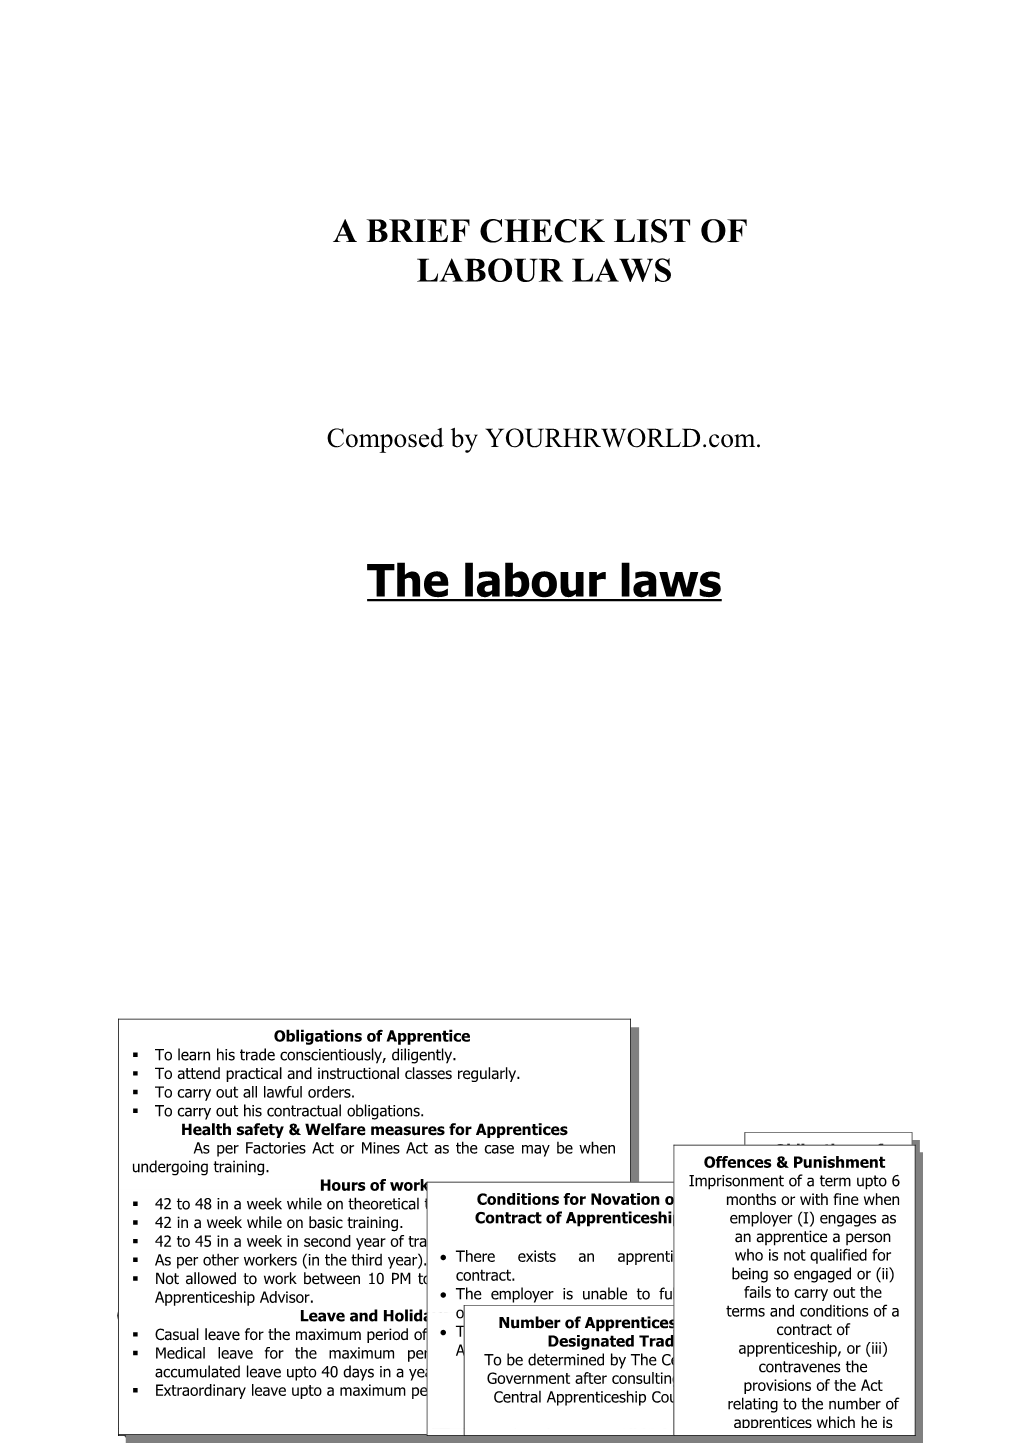 Tips on Labour Laws